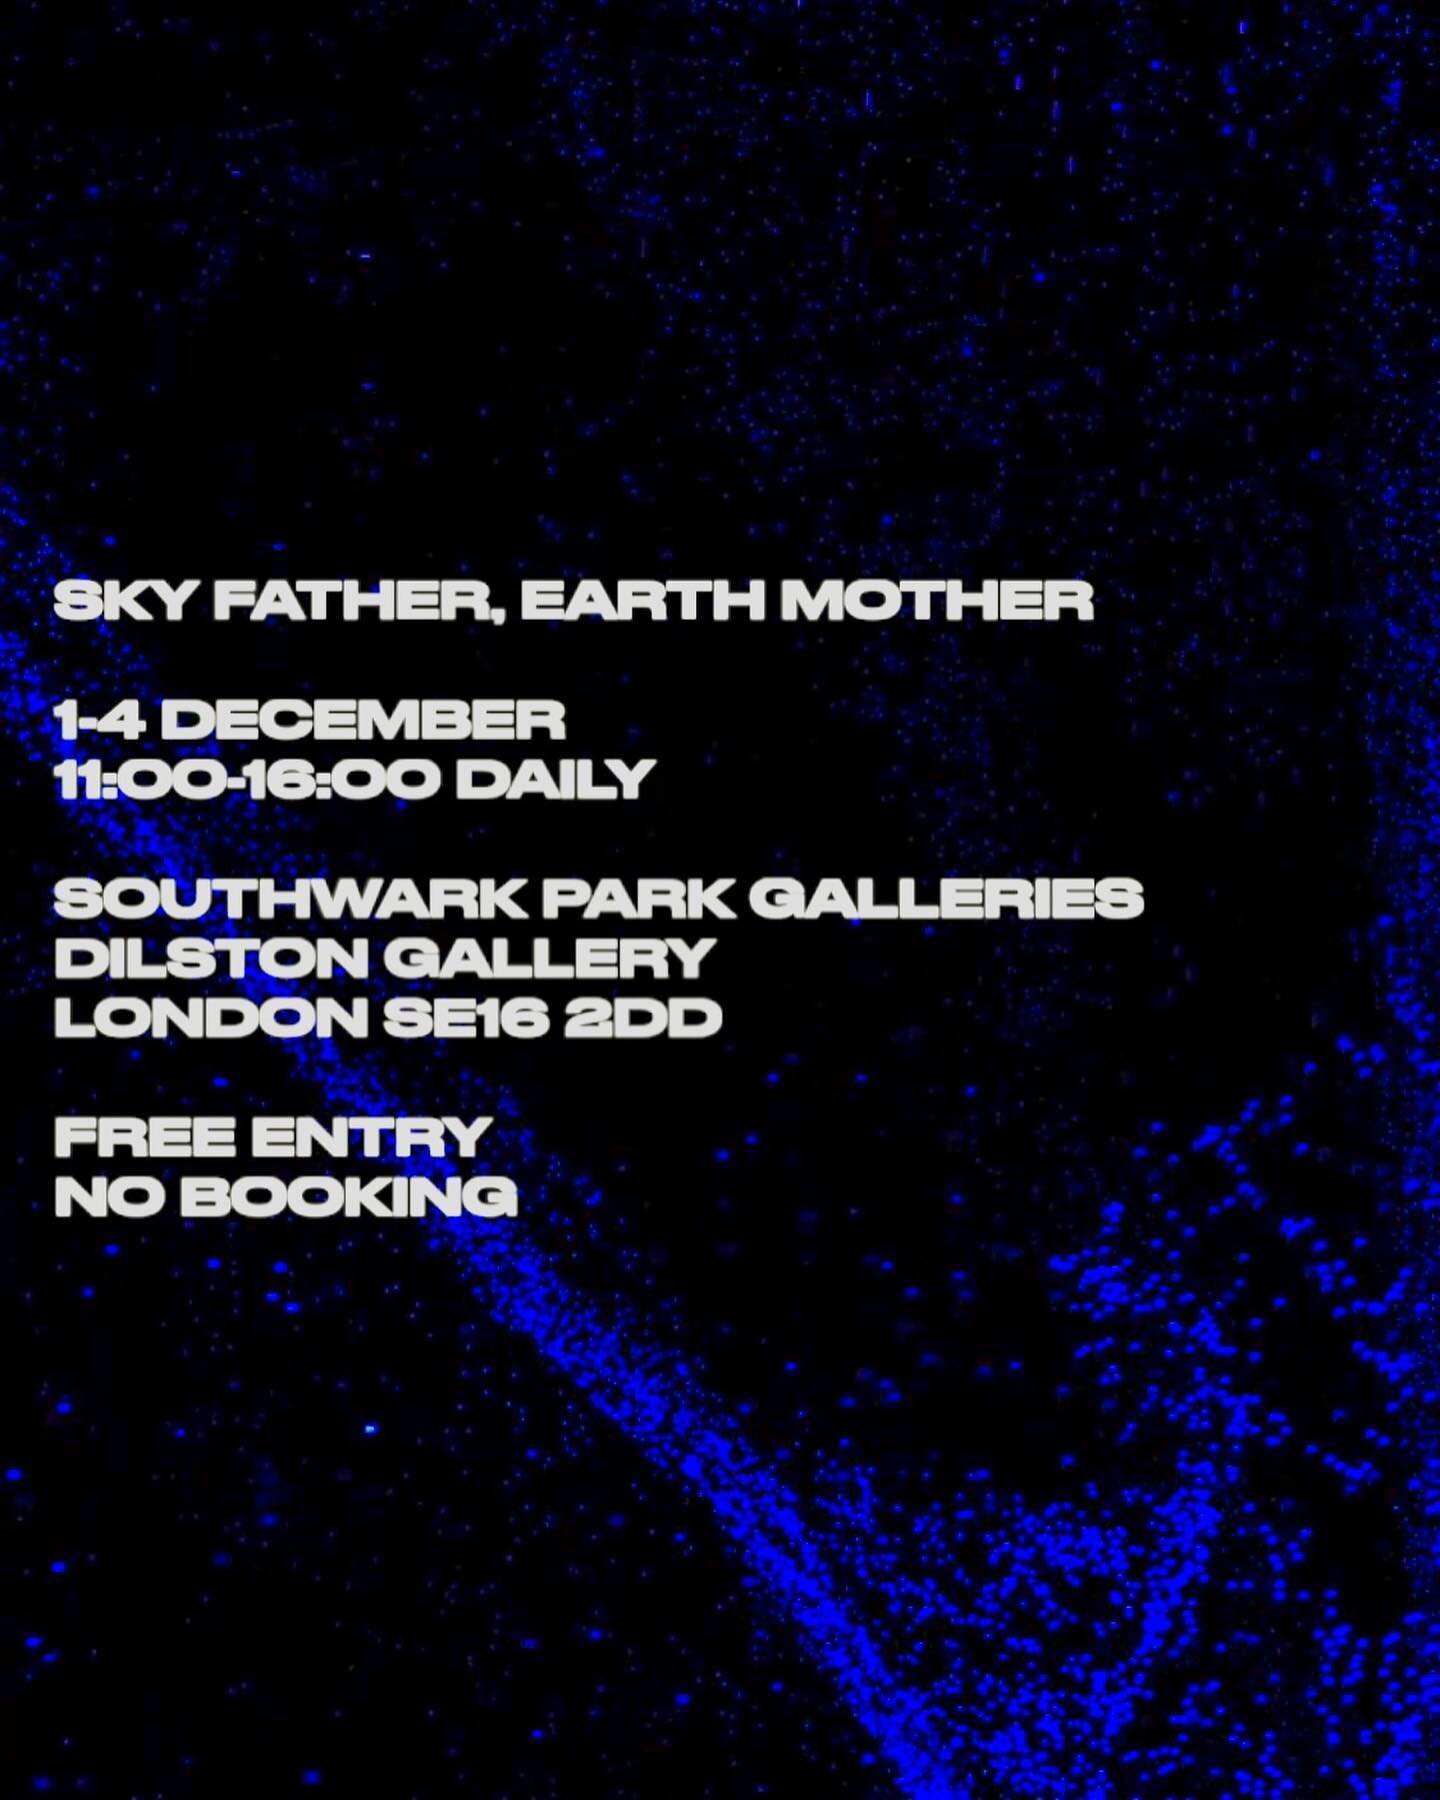 Sky Father, Earth Mother: Install

December 1&ndash;4
11:00&mdash;16:00 Daily

Southwark Park Galleries
Dilston Grove
London SE16 2DD

Free Entry
No Booking